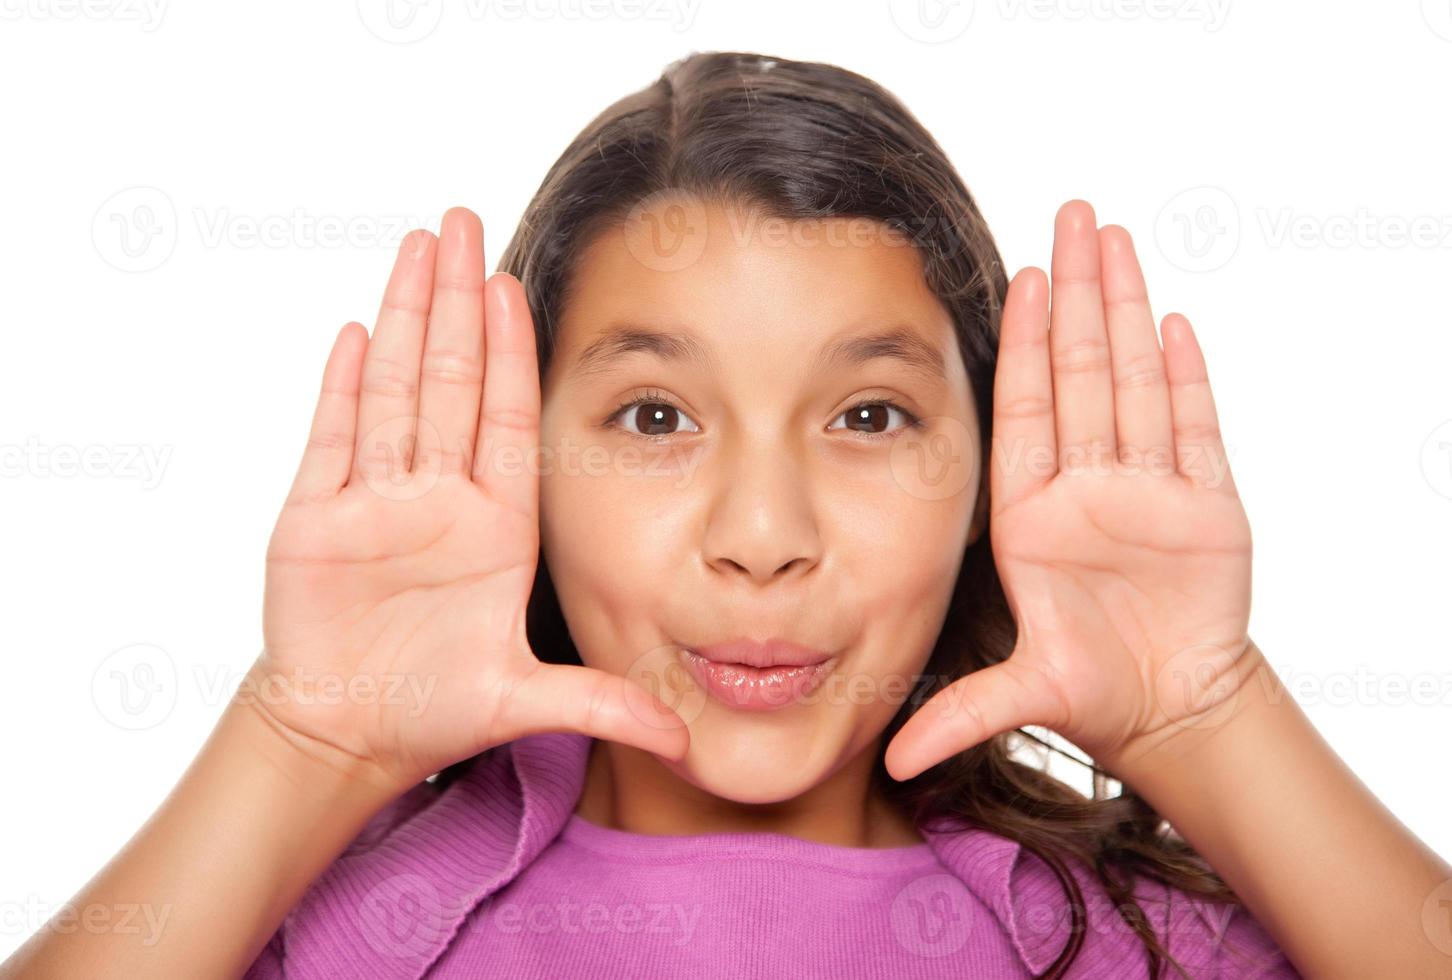 Pretty Hispanic Girl Framing Her Face with Hands photo